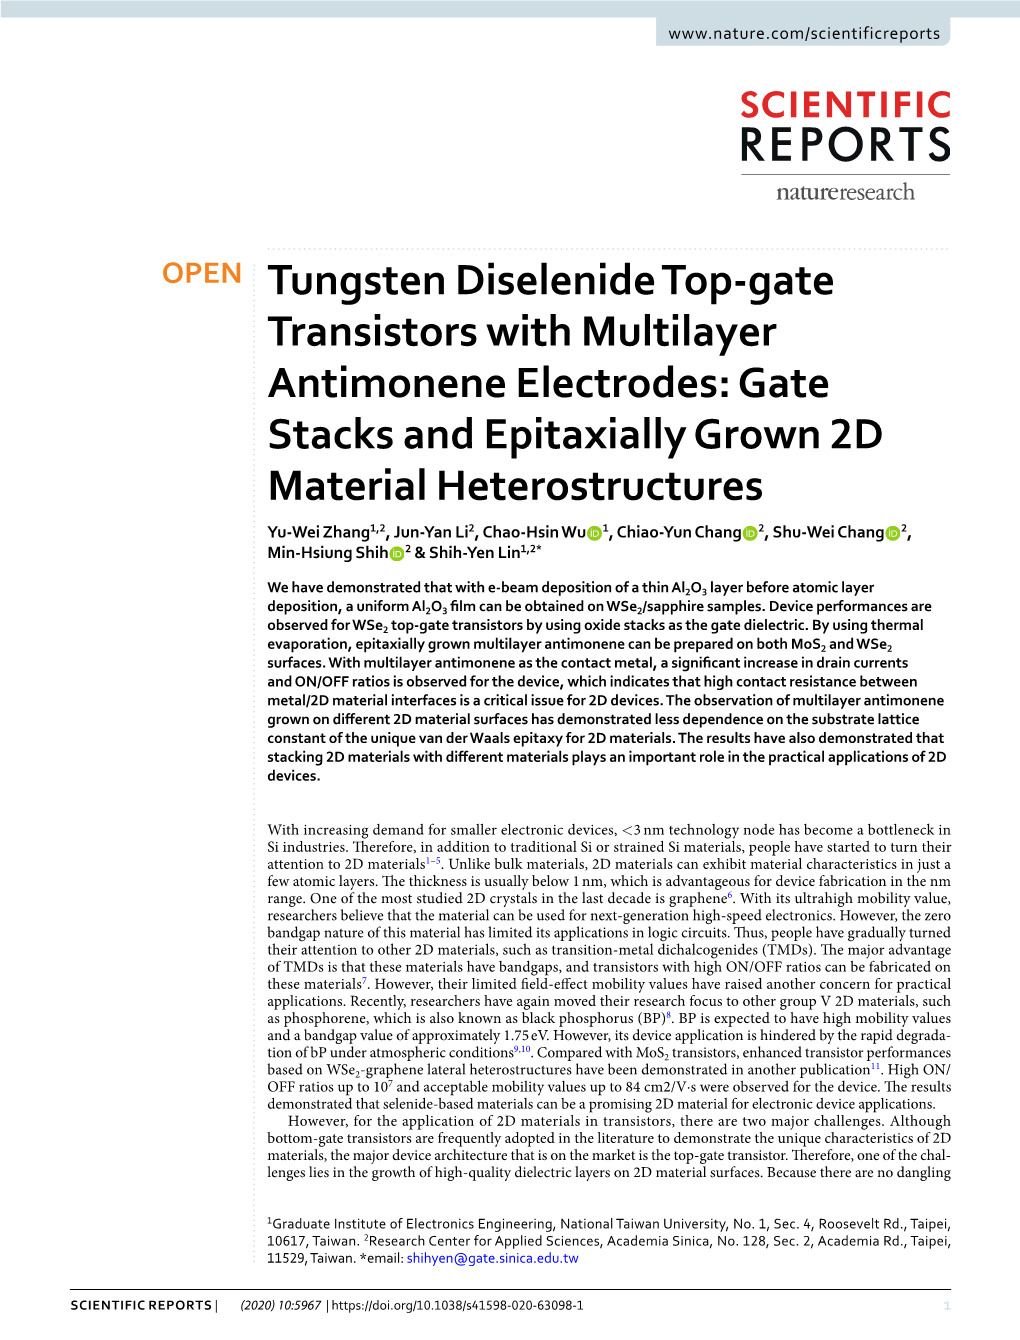 Tungsten Diselenide Top-Gate Transistors with Multilayer